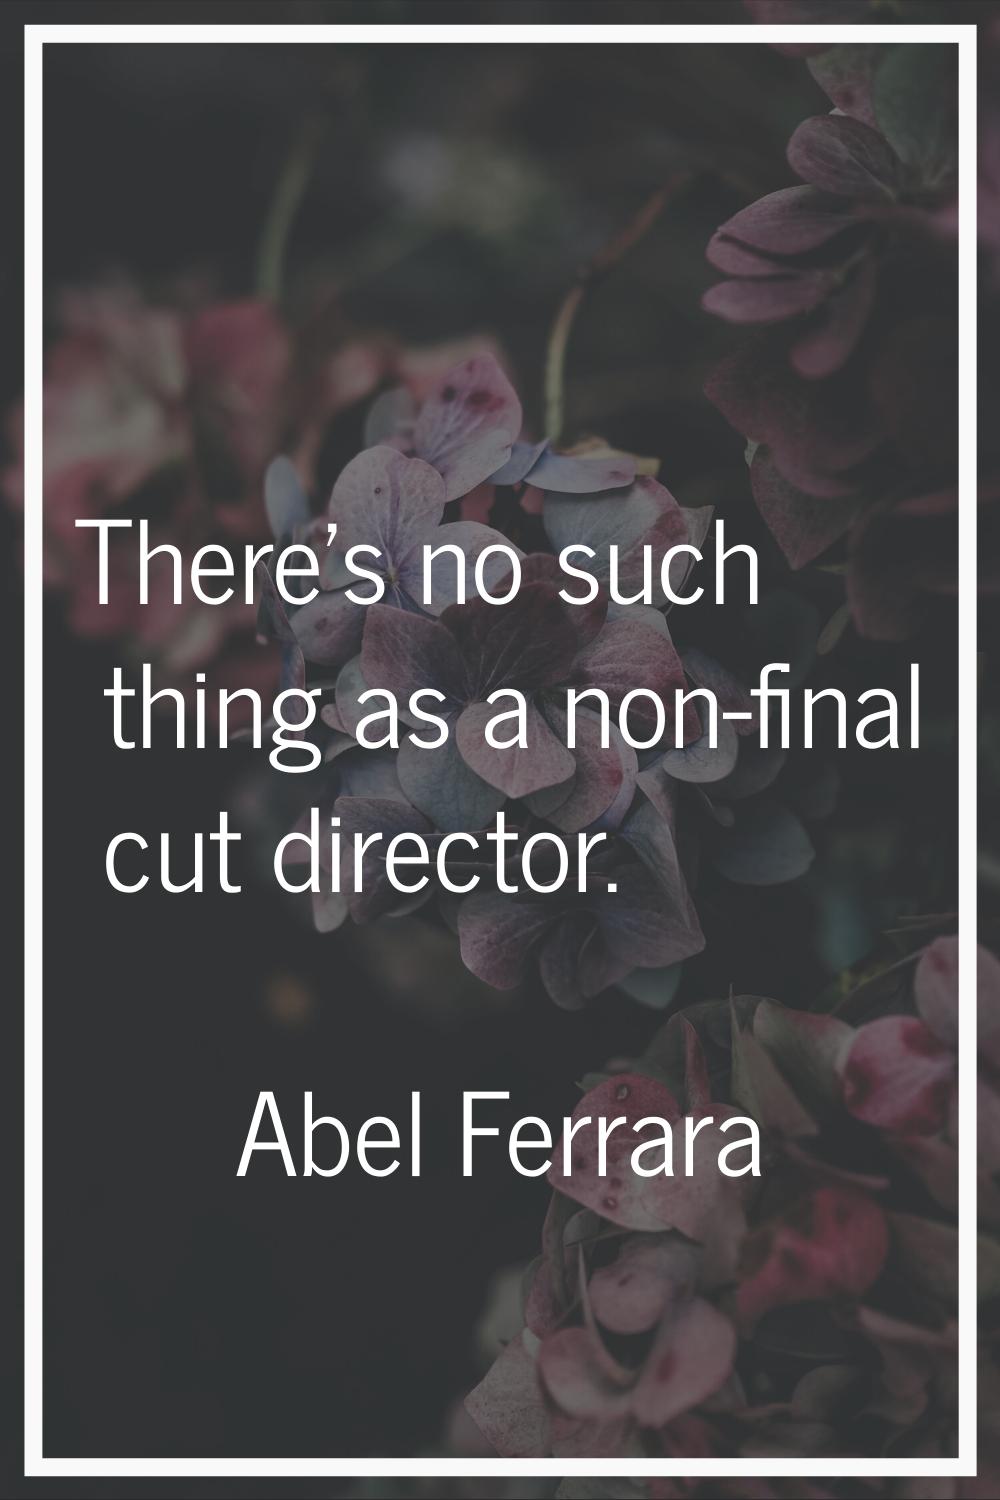 There's no such thing as a non-final cut director.